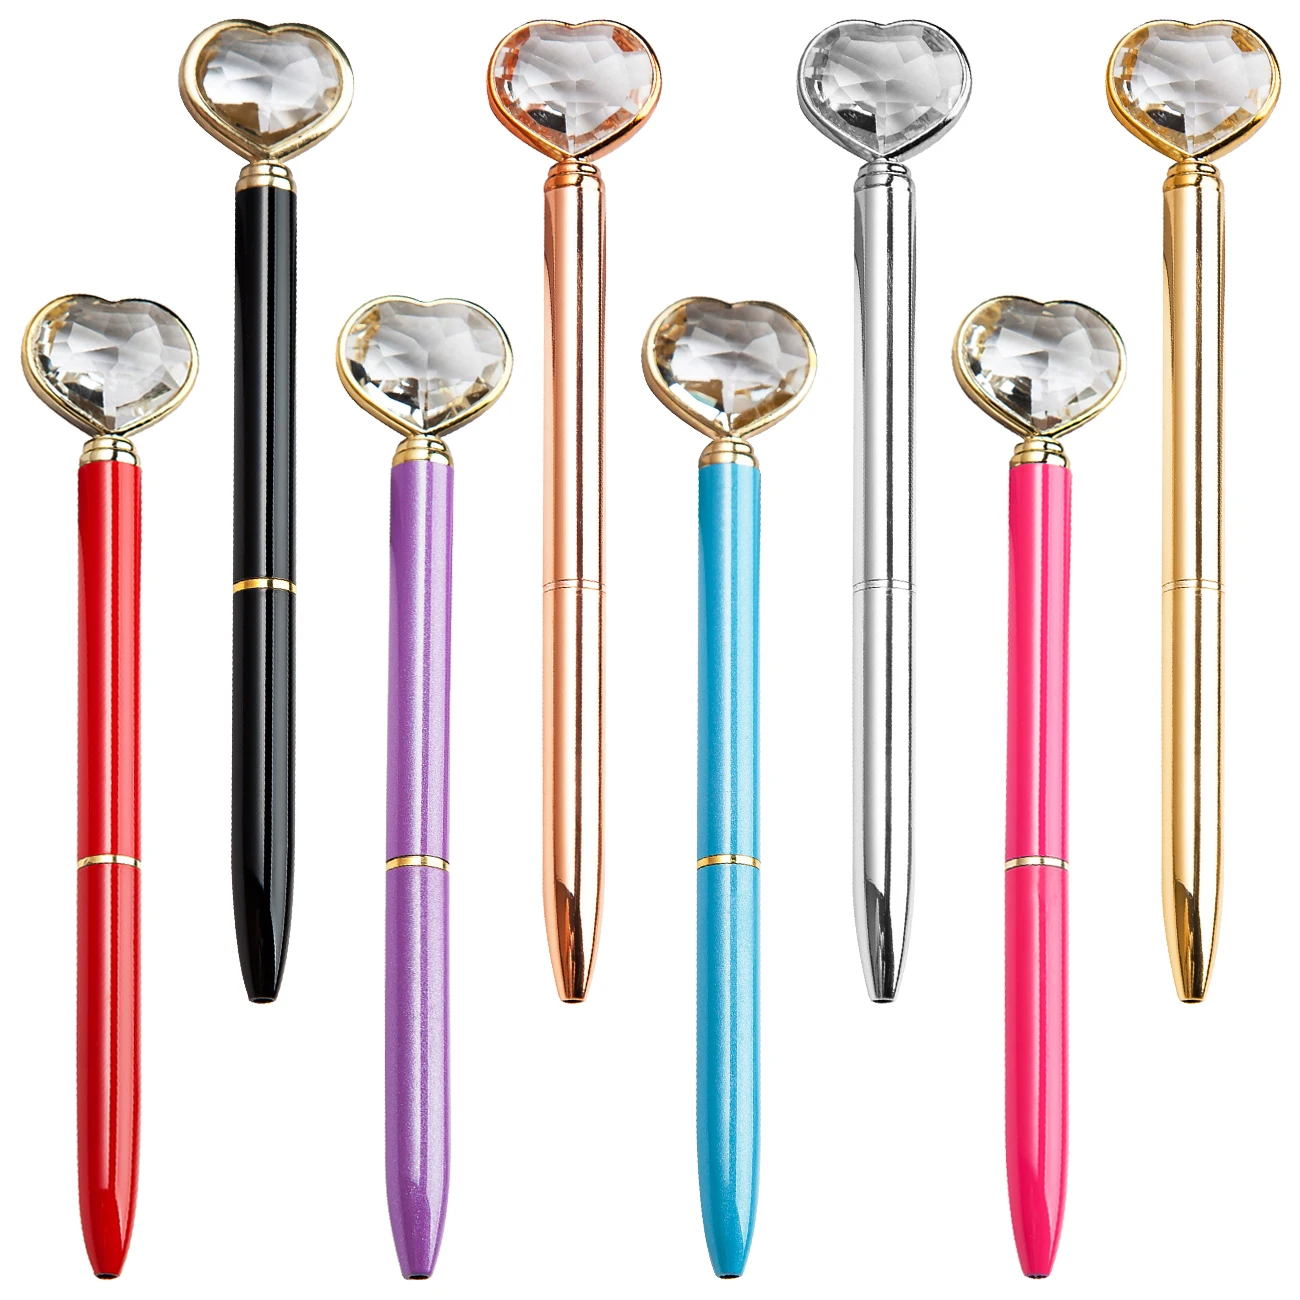 20Pcs/lot Customize Metal Ballpoint pens  Heart Shape diamond ball pen promotional metal ball pen Stationery Pens 4 pcs price tag clip signs label holder promotional clamps clips supermarket car metal supermarkets display